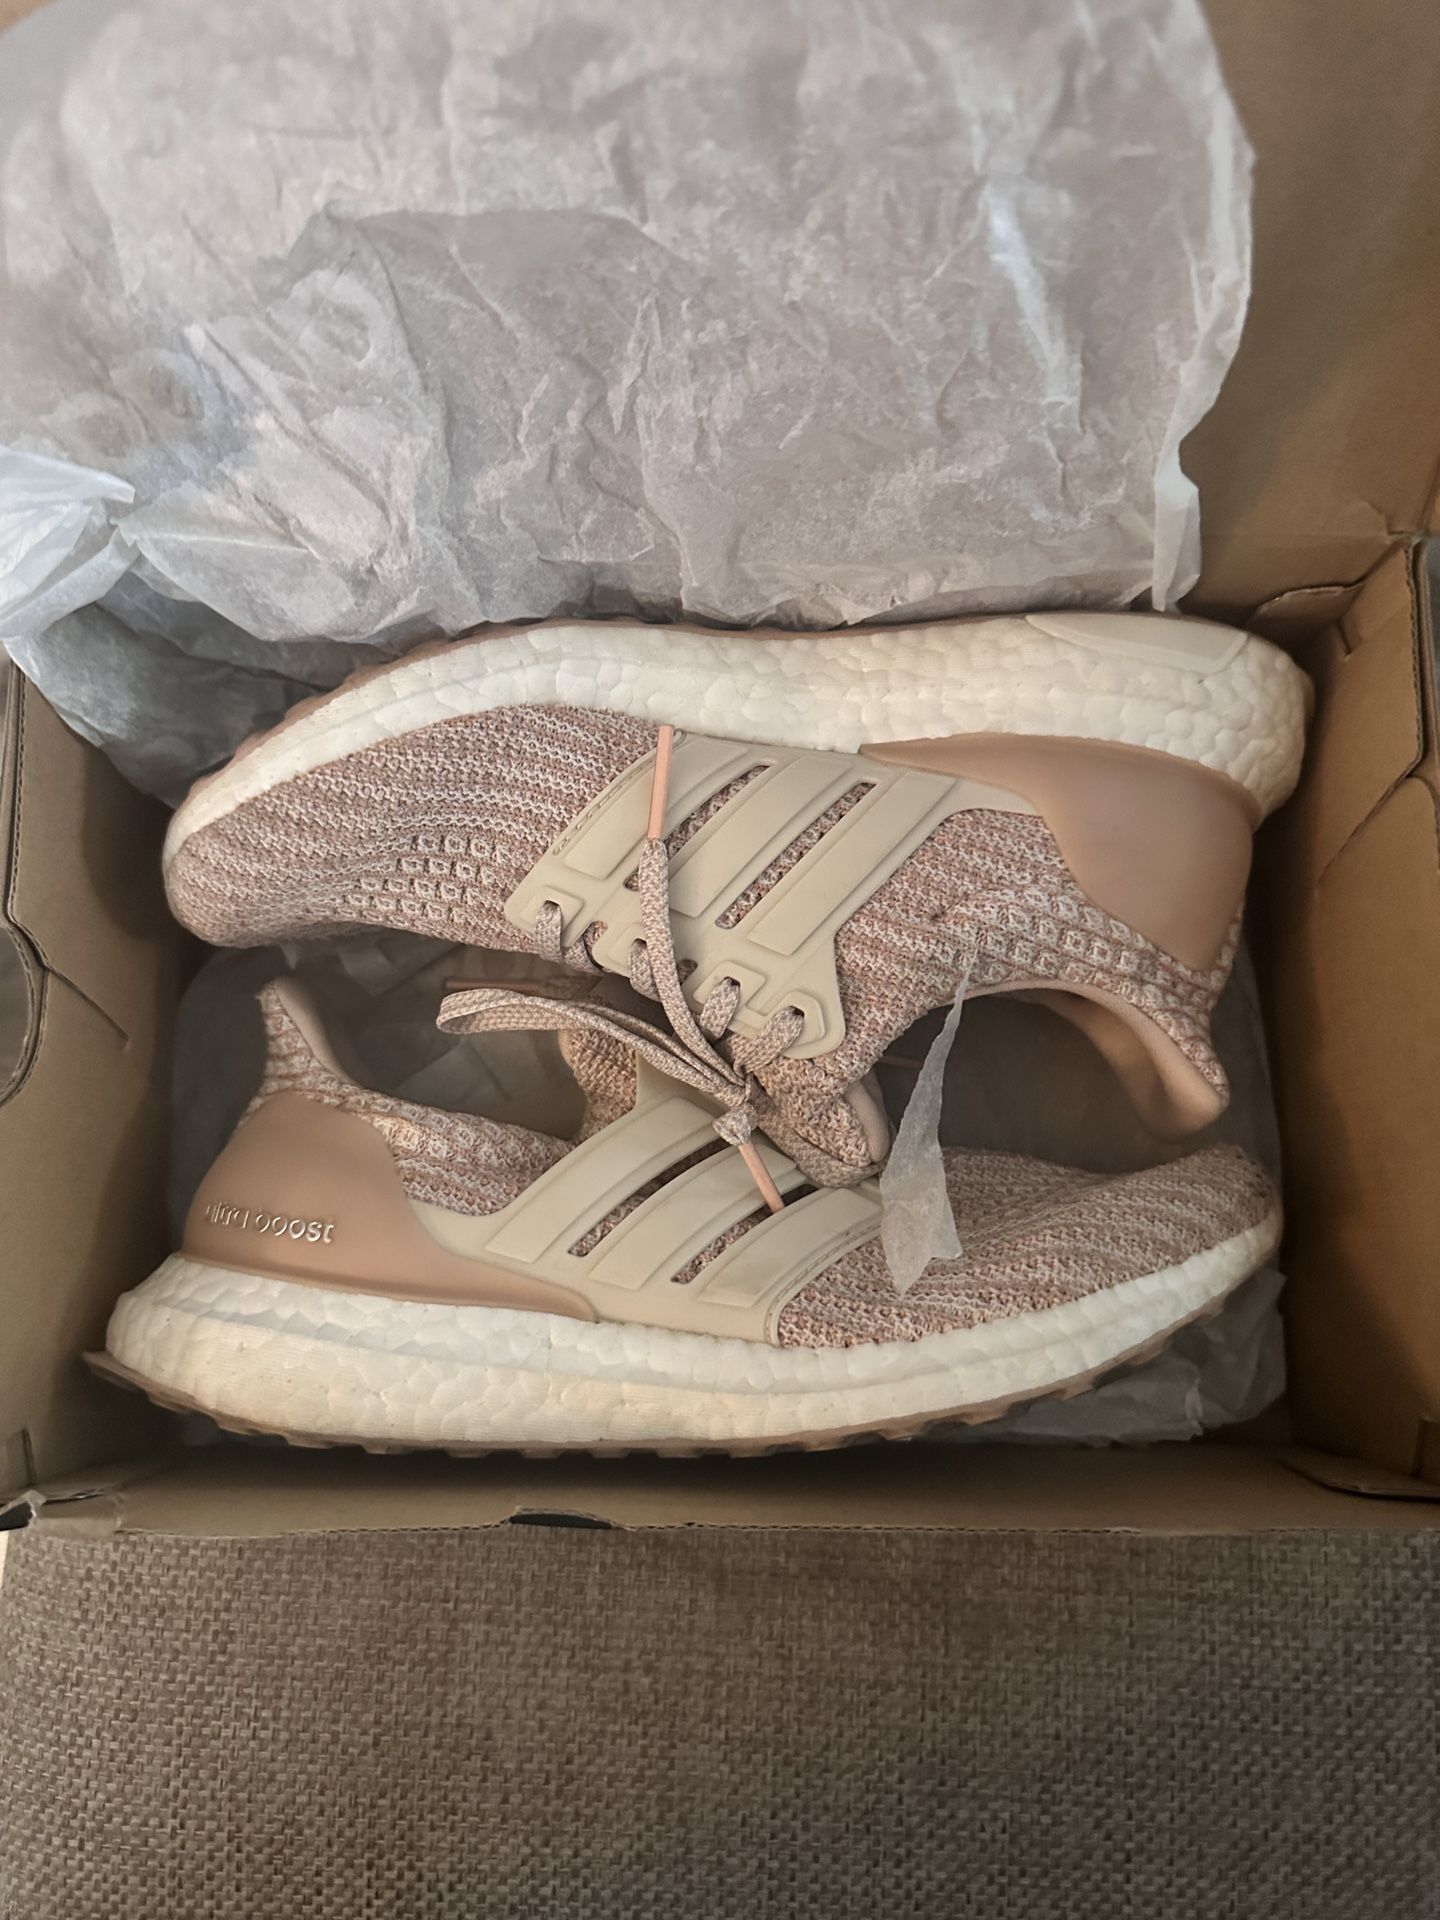 Women’s Adidas Boost Pink Size 6 